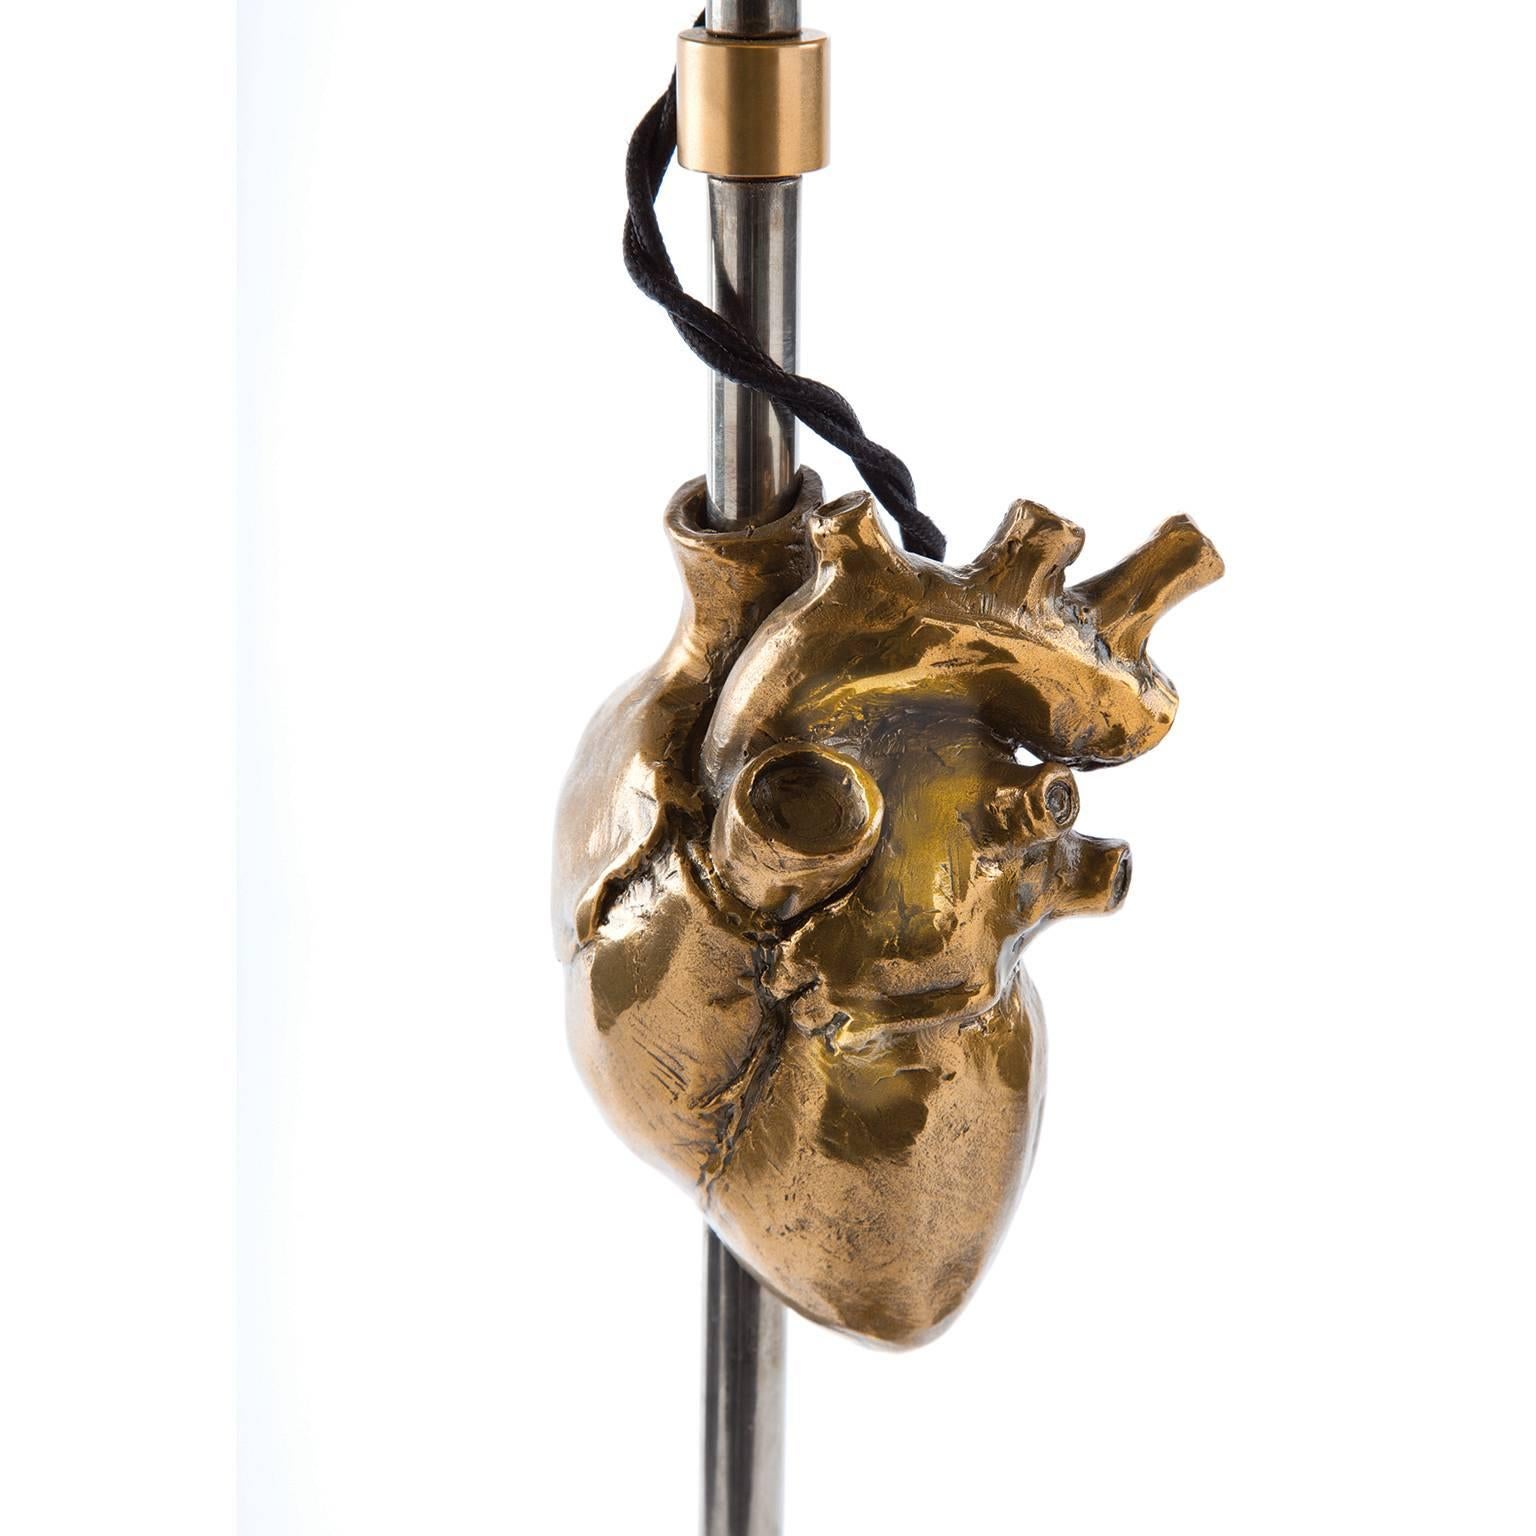 The Kardia lamp is composed of a cast bronze 'human heart' and base (shown with a gold patina) and the body and hardware are solid brass (shown in a light antiqued nickel plating). It is available in various metal finishes and combinations as well